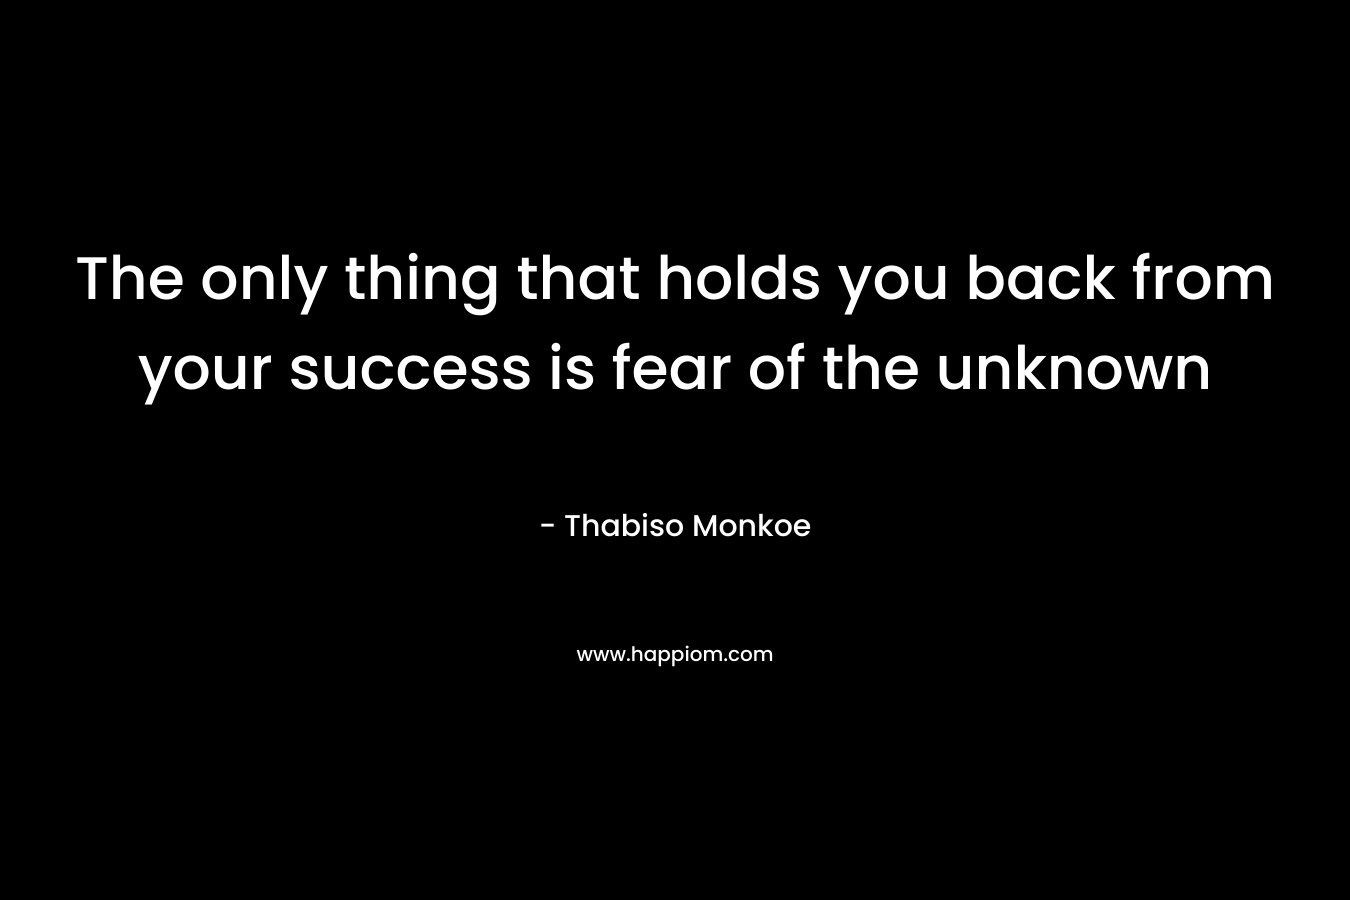 The only thing that holds you back from your success is fear of the unknown